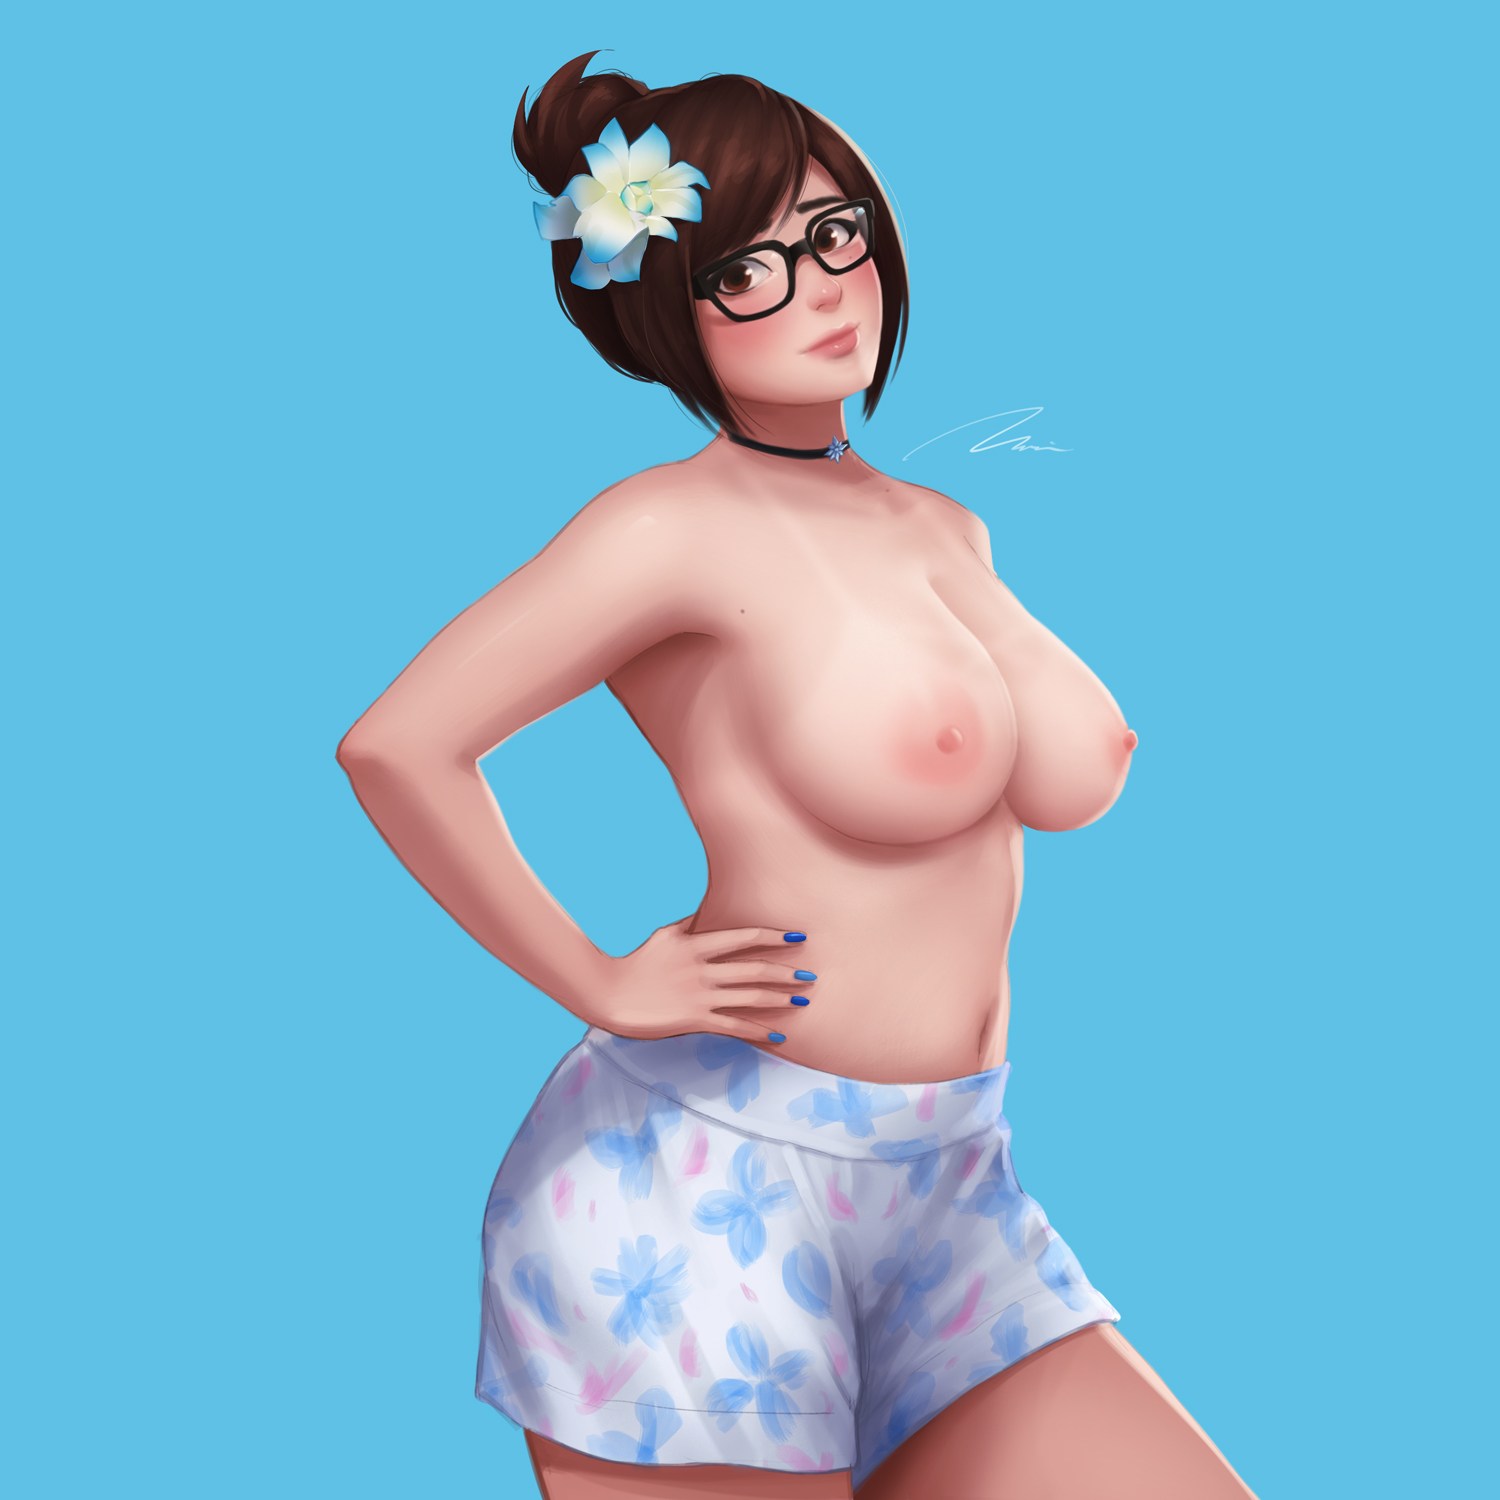 __mei_overwatch_drawn_by_umigraphics__52fe8b1a0c2c2b8154619d1441fcd710